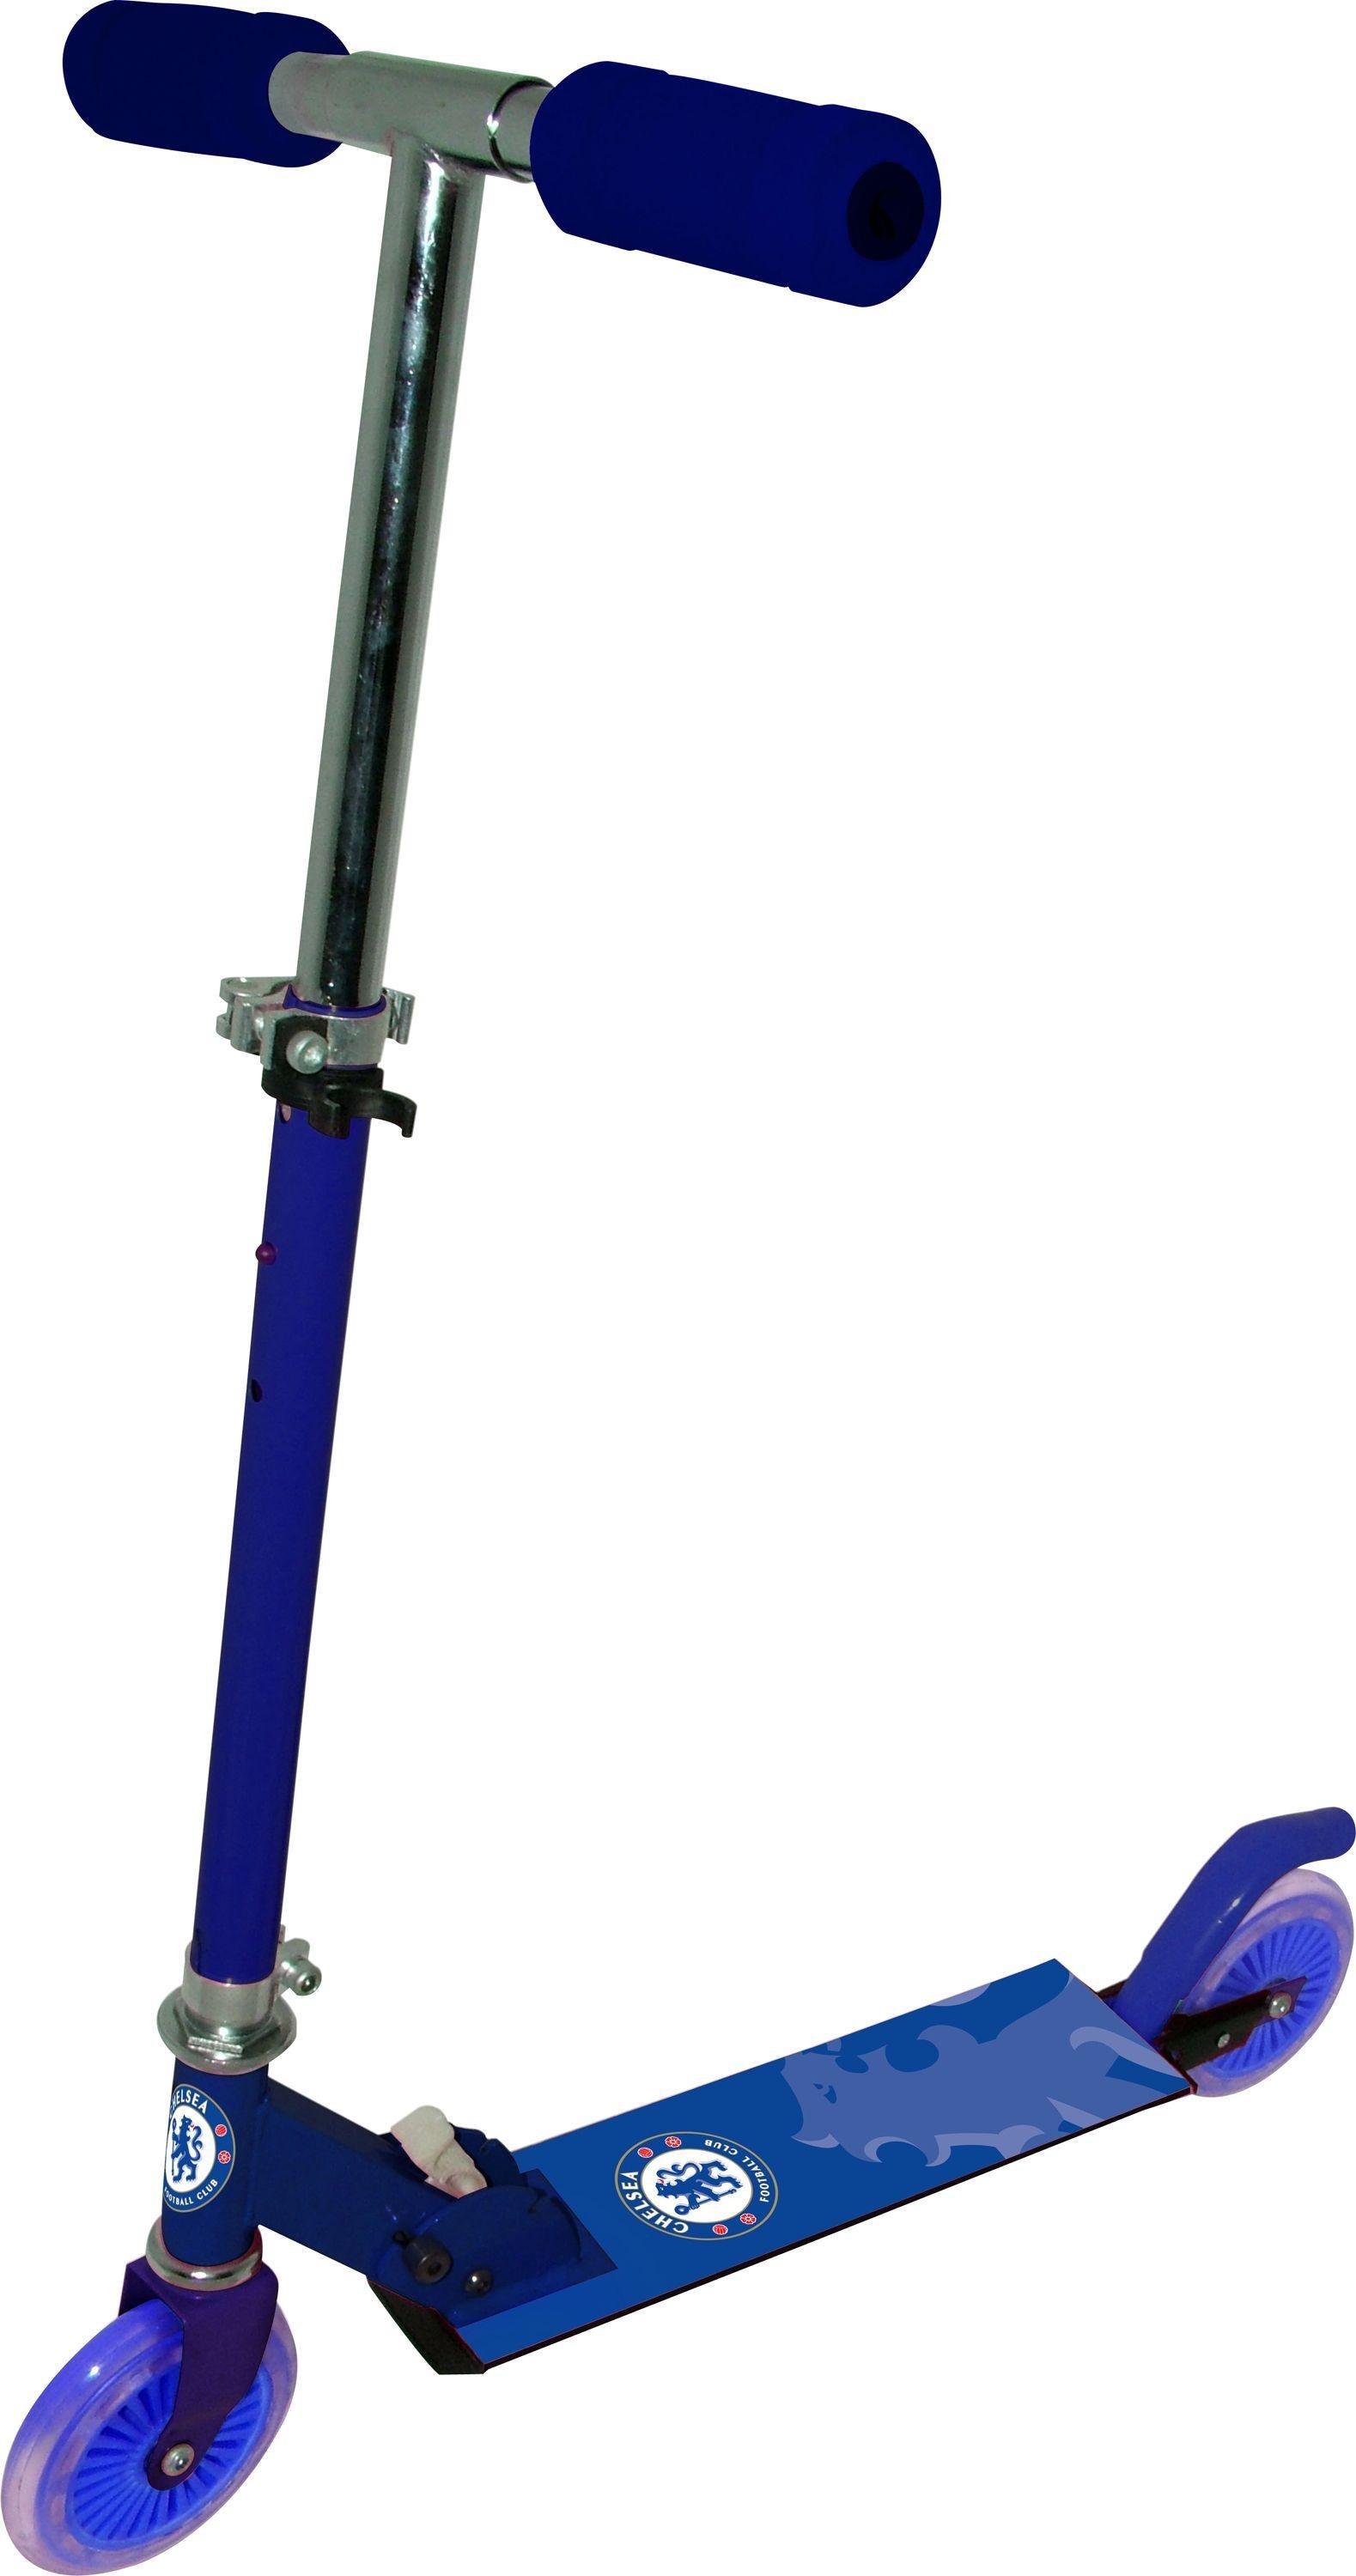 Chelsea FC Scooter - Blue.